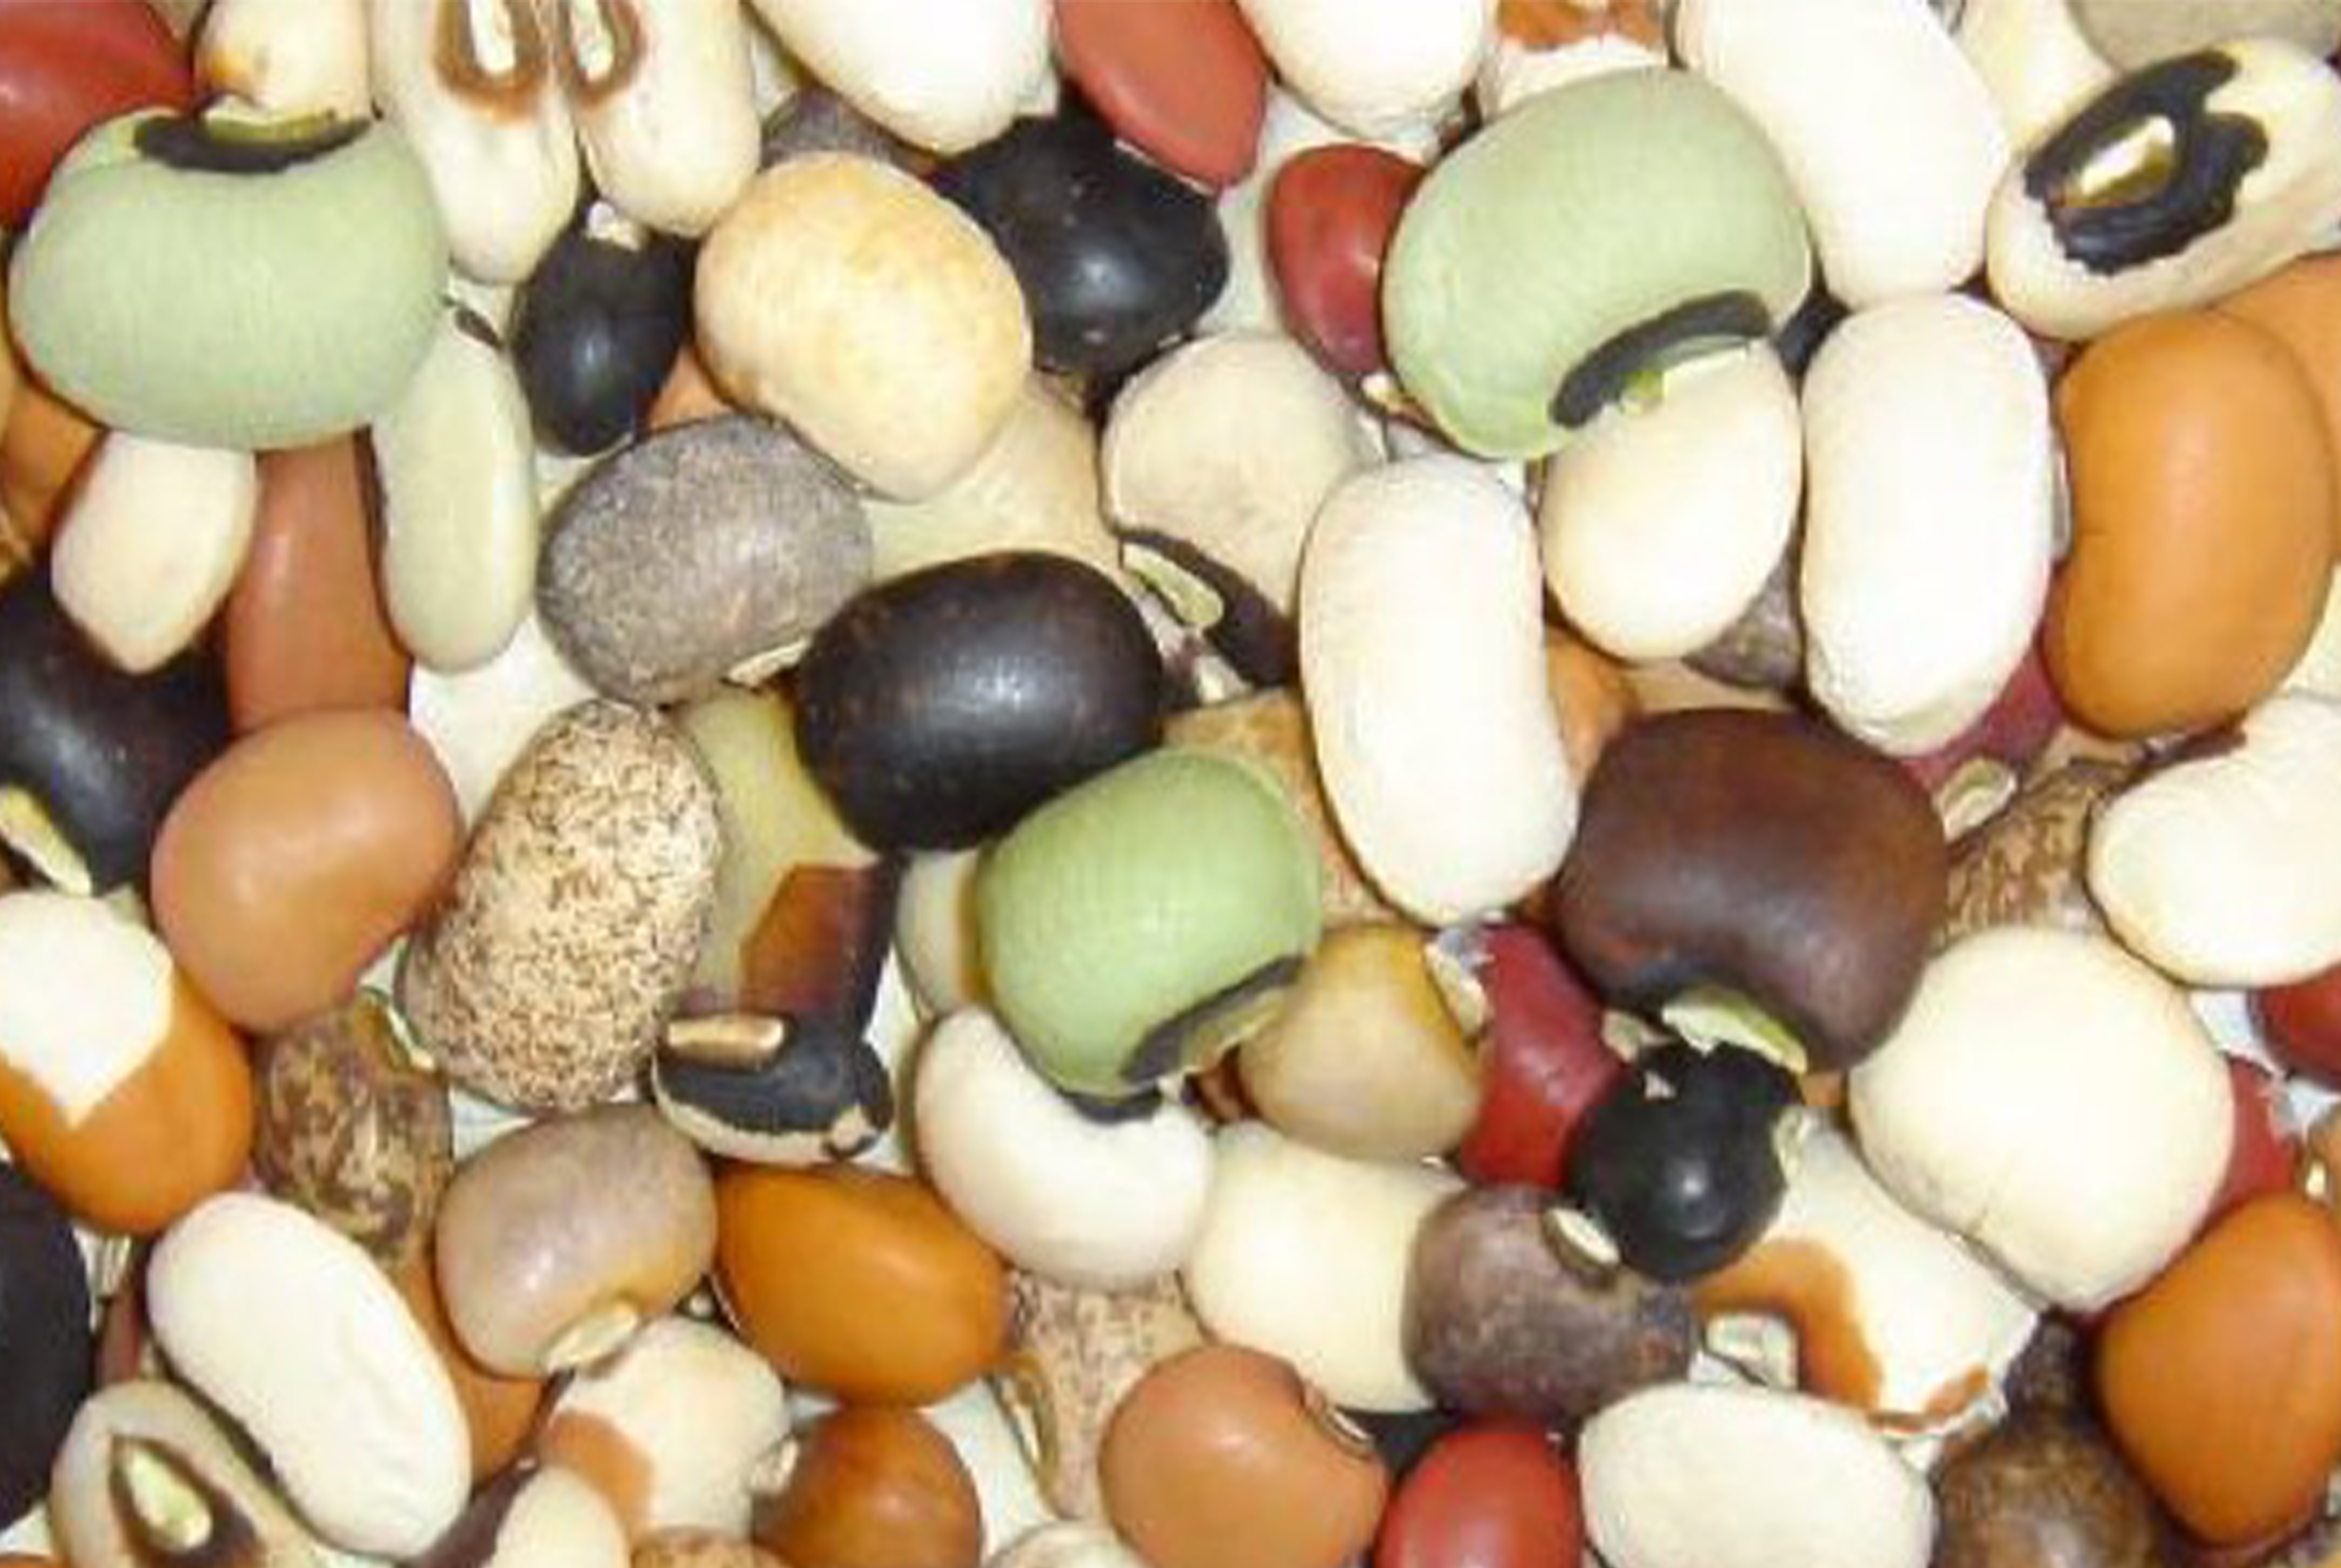 up close picture of beans